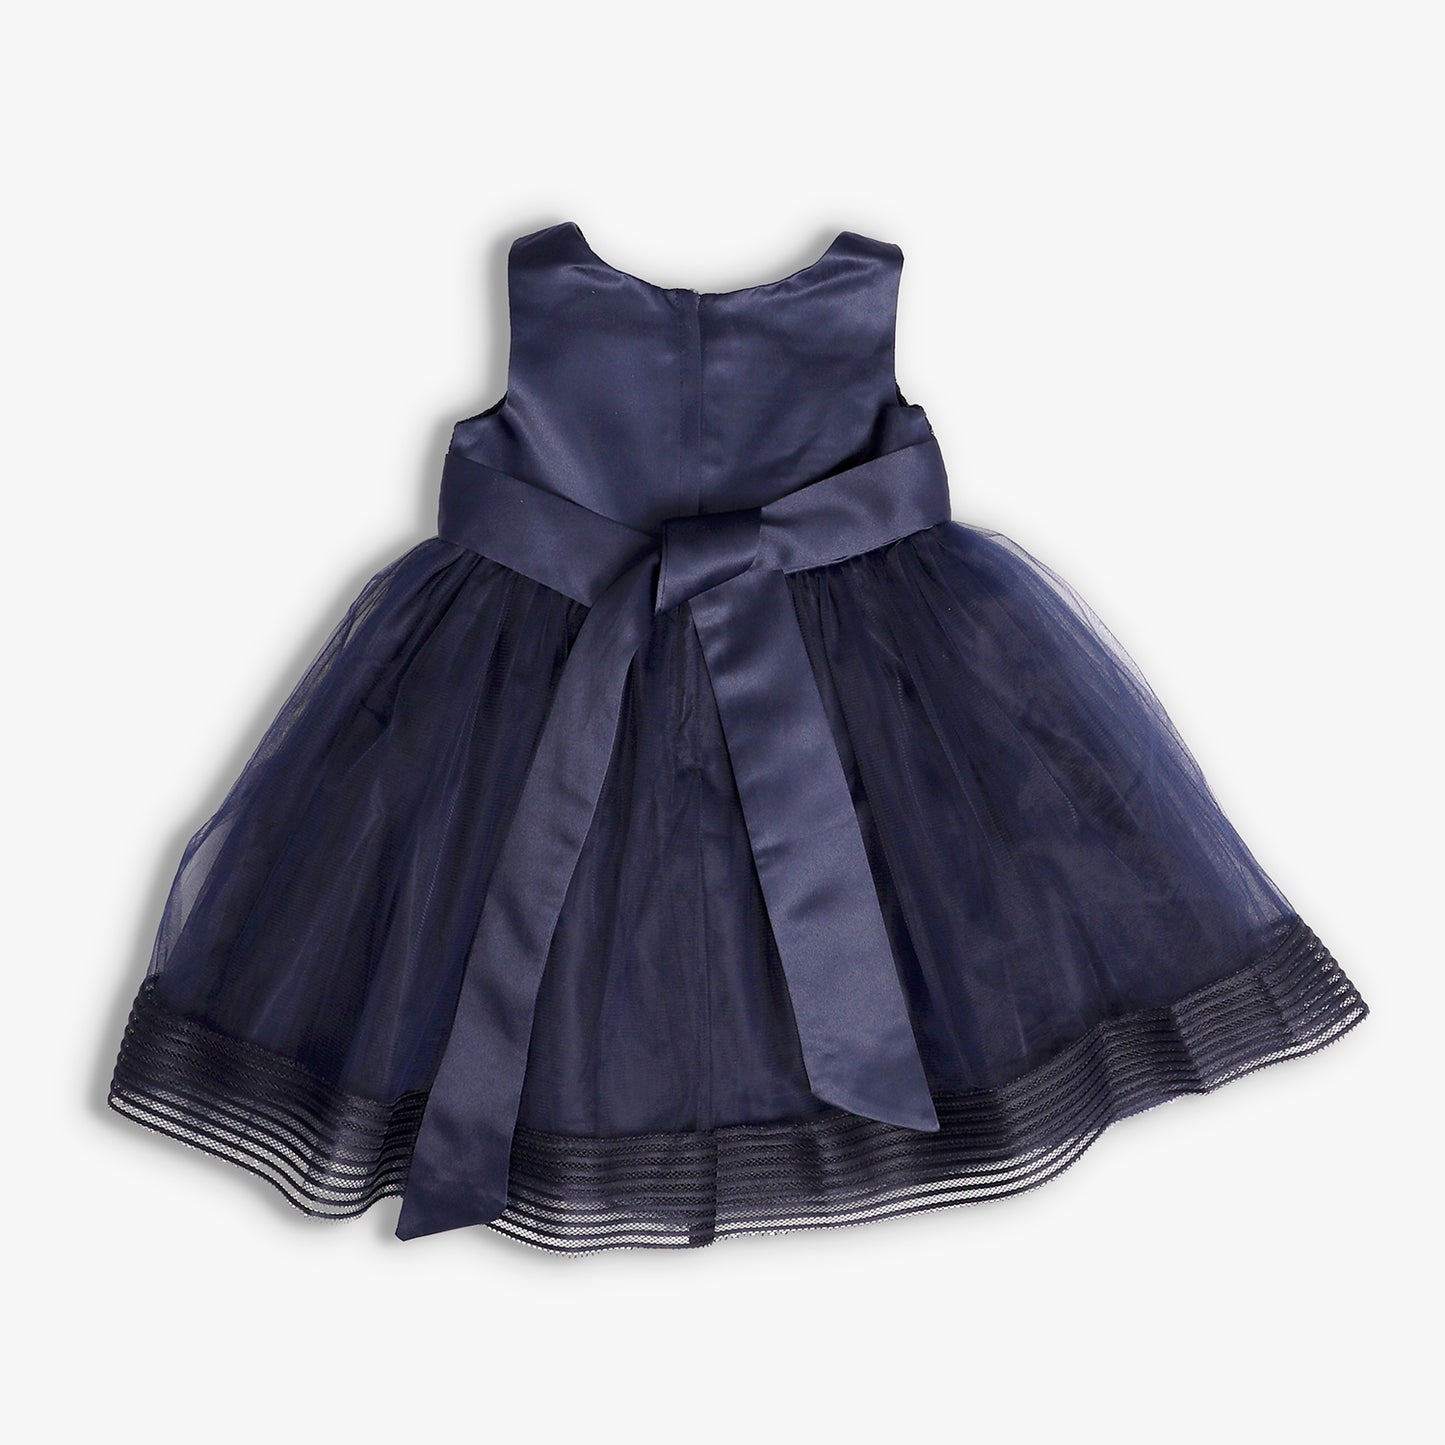 Girls' Party Occasion Dress, Navy